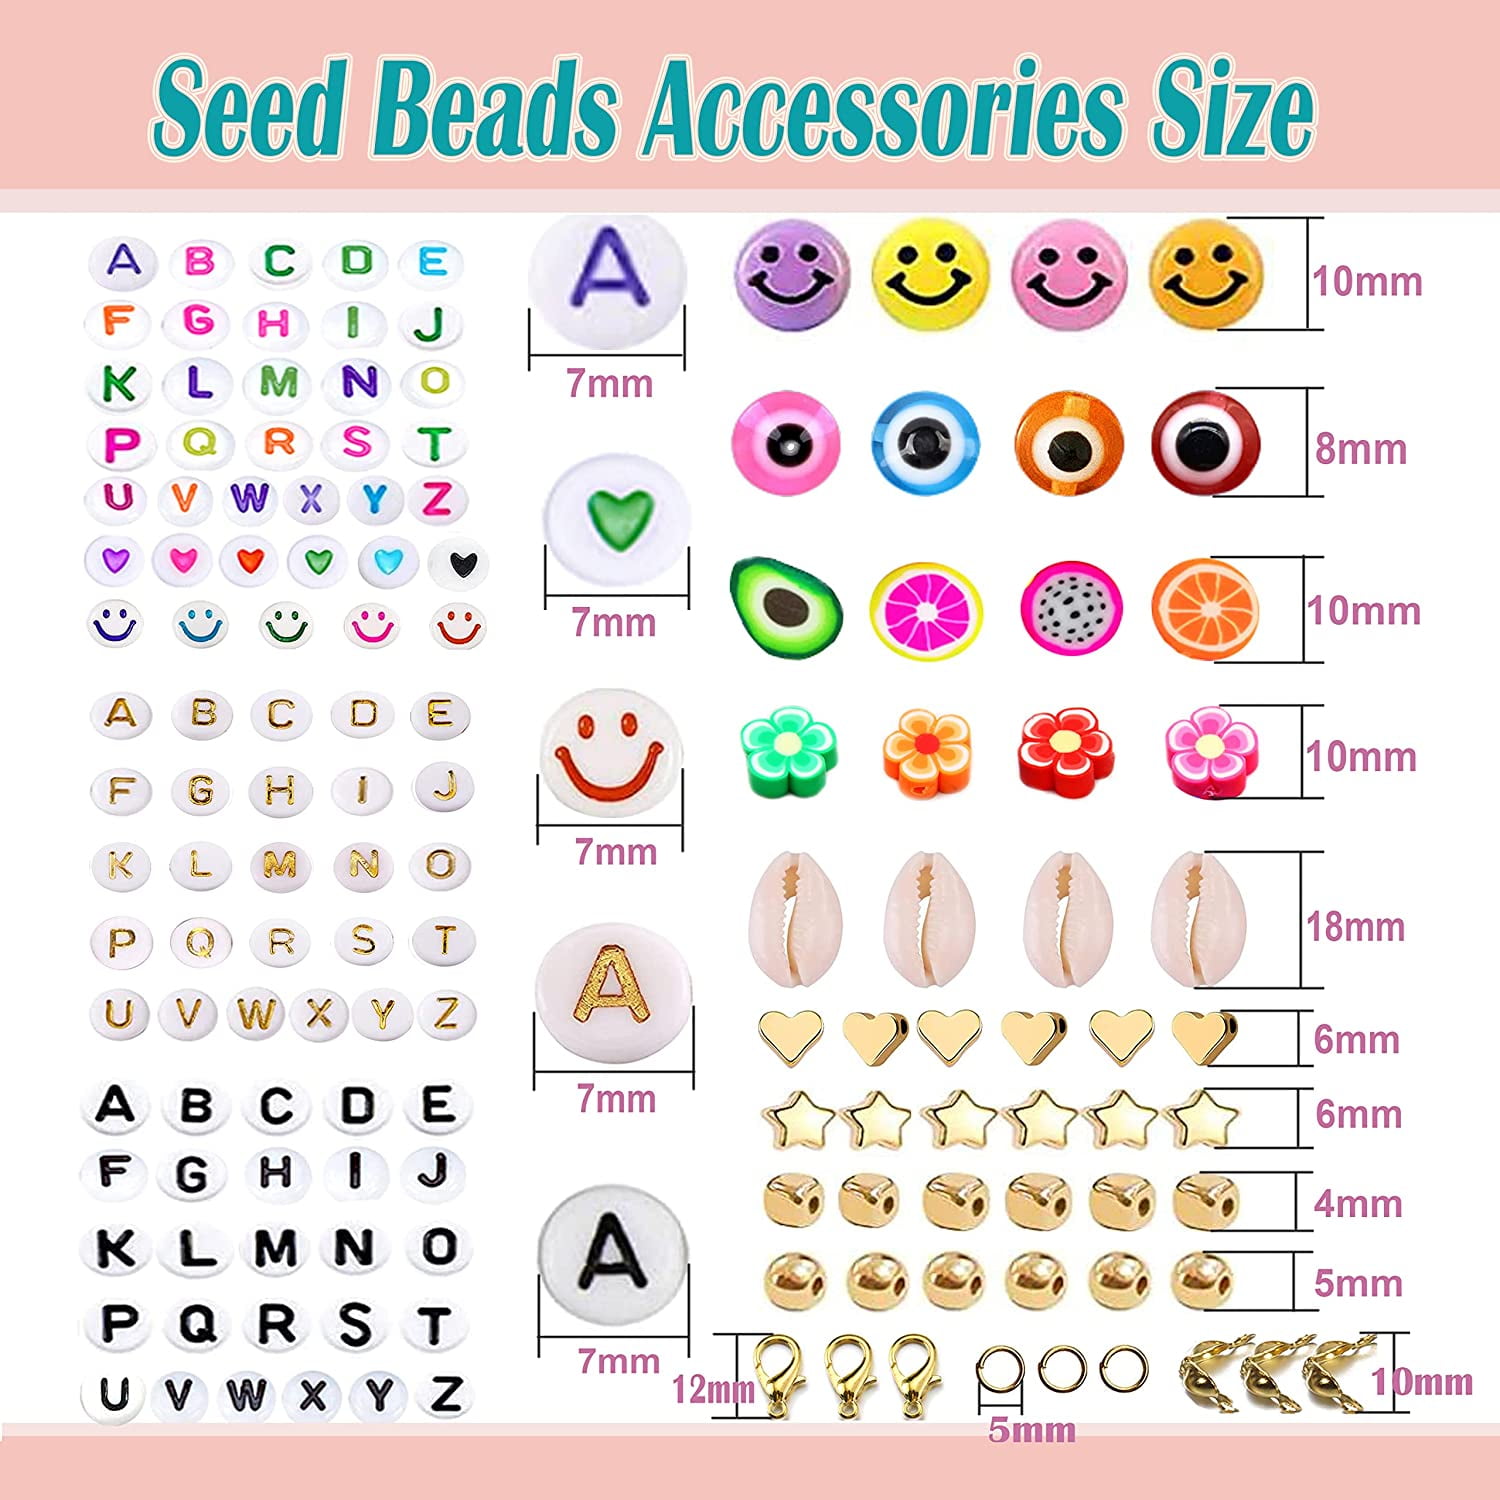 24270+ Candy Colors Glass Seed Beads for Bracelets Making, 24 Color 2 MM  Seed Beads Kit for Jewelry Making with Colorful Letter Alphabet Beads  Elastic